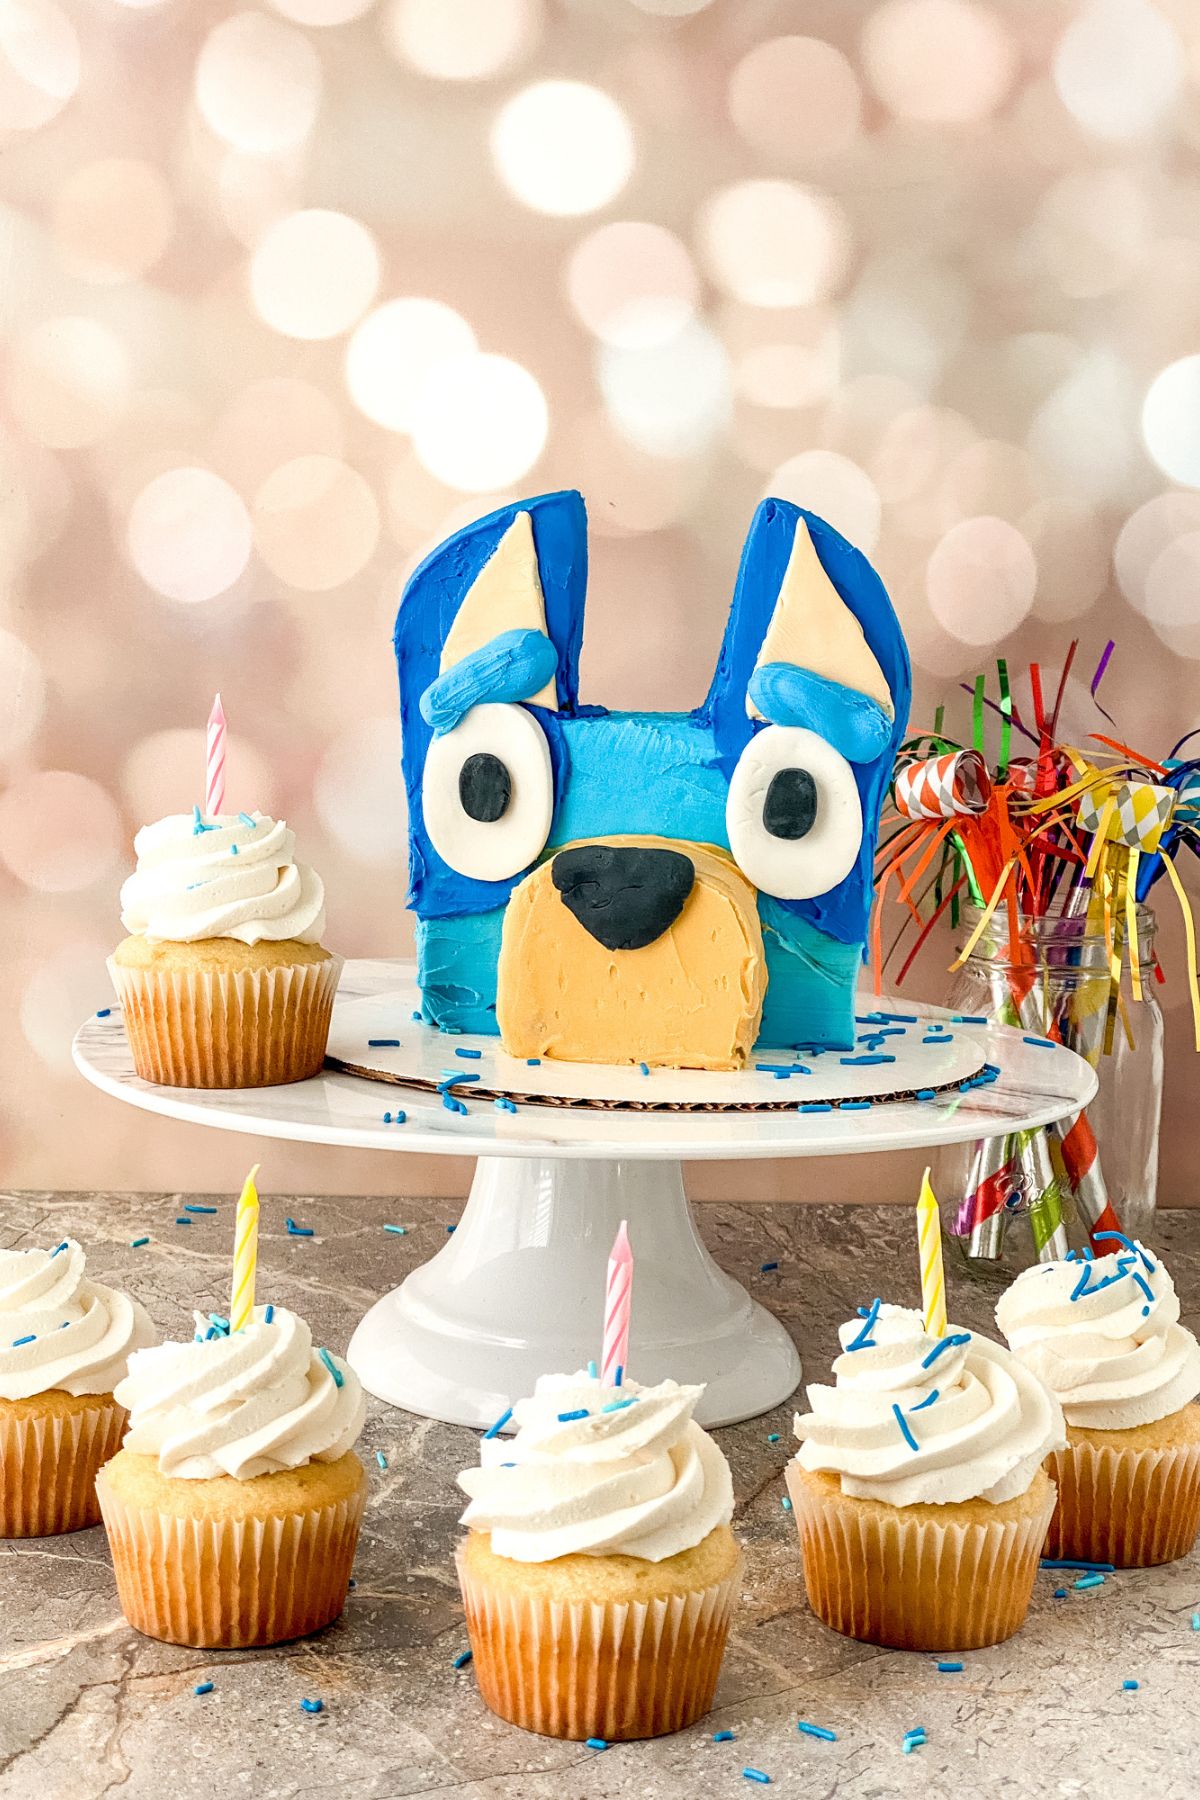 A cake in the shape of Bluey's head.